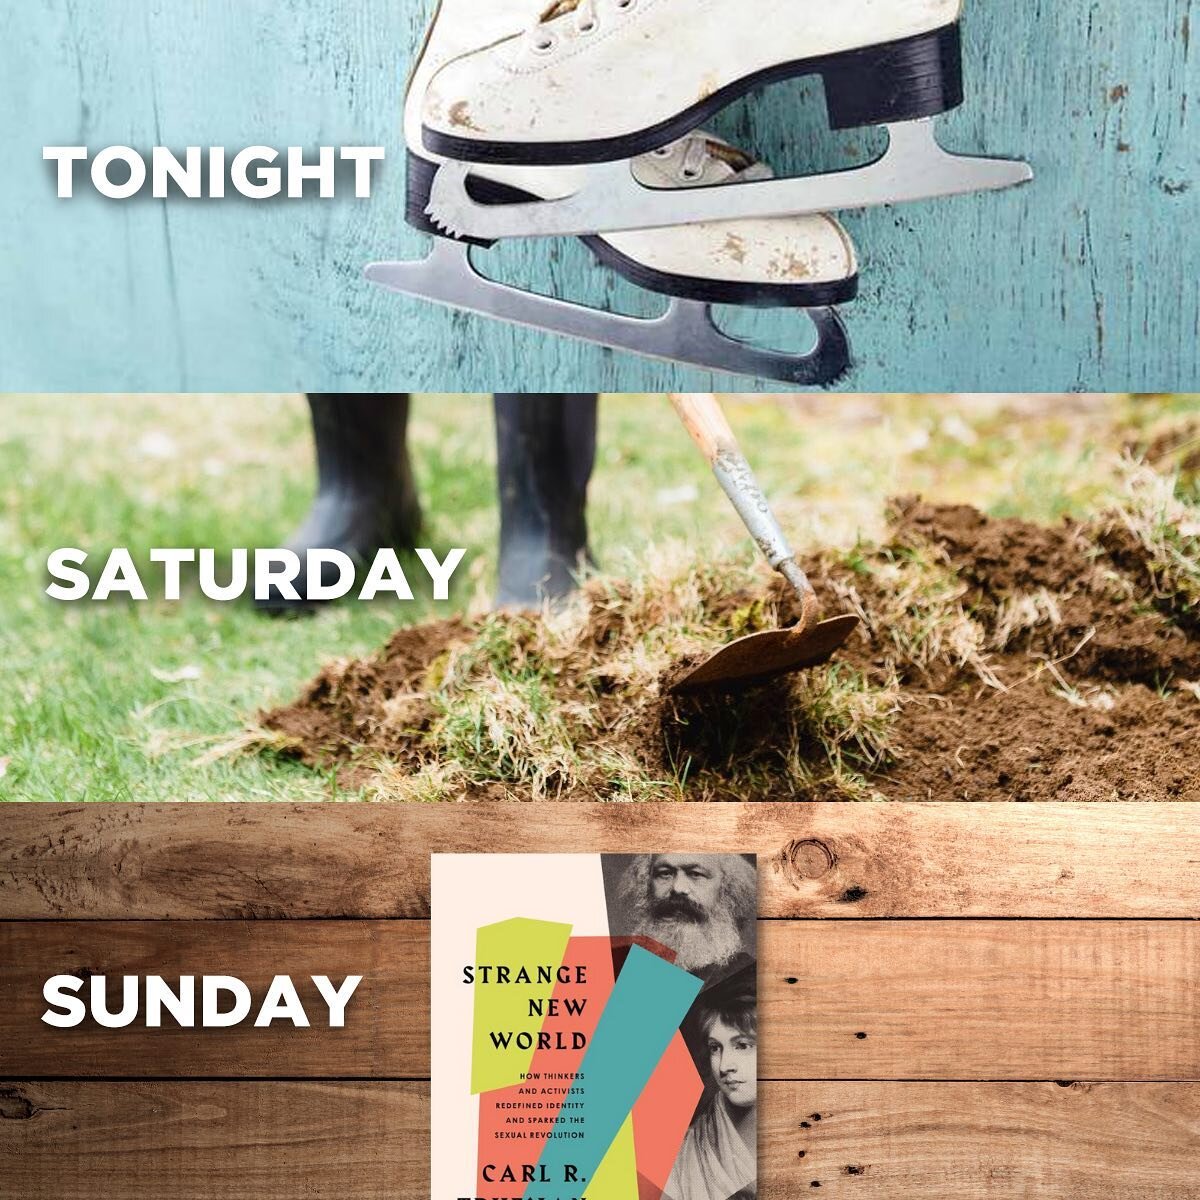 Here&rsquo;s a rundown of what&rsquo;s happening this week:
&bull; KPC Kids go ice skating tonight at Kendall Ice Arena at 6:00 PM. $15 per skater. 

&bull; YFC Workday- beautifying the landscape at Youth for Christ of Greater Miami- Saturday at 9 AM